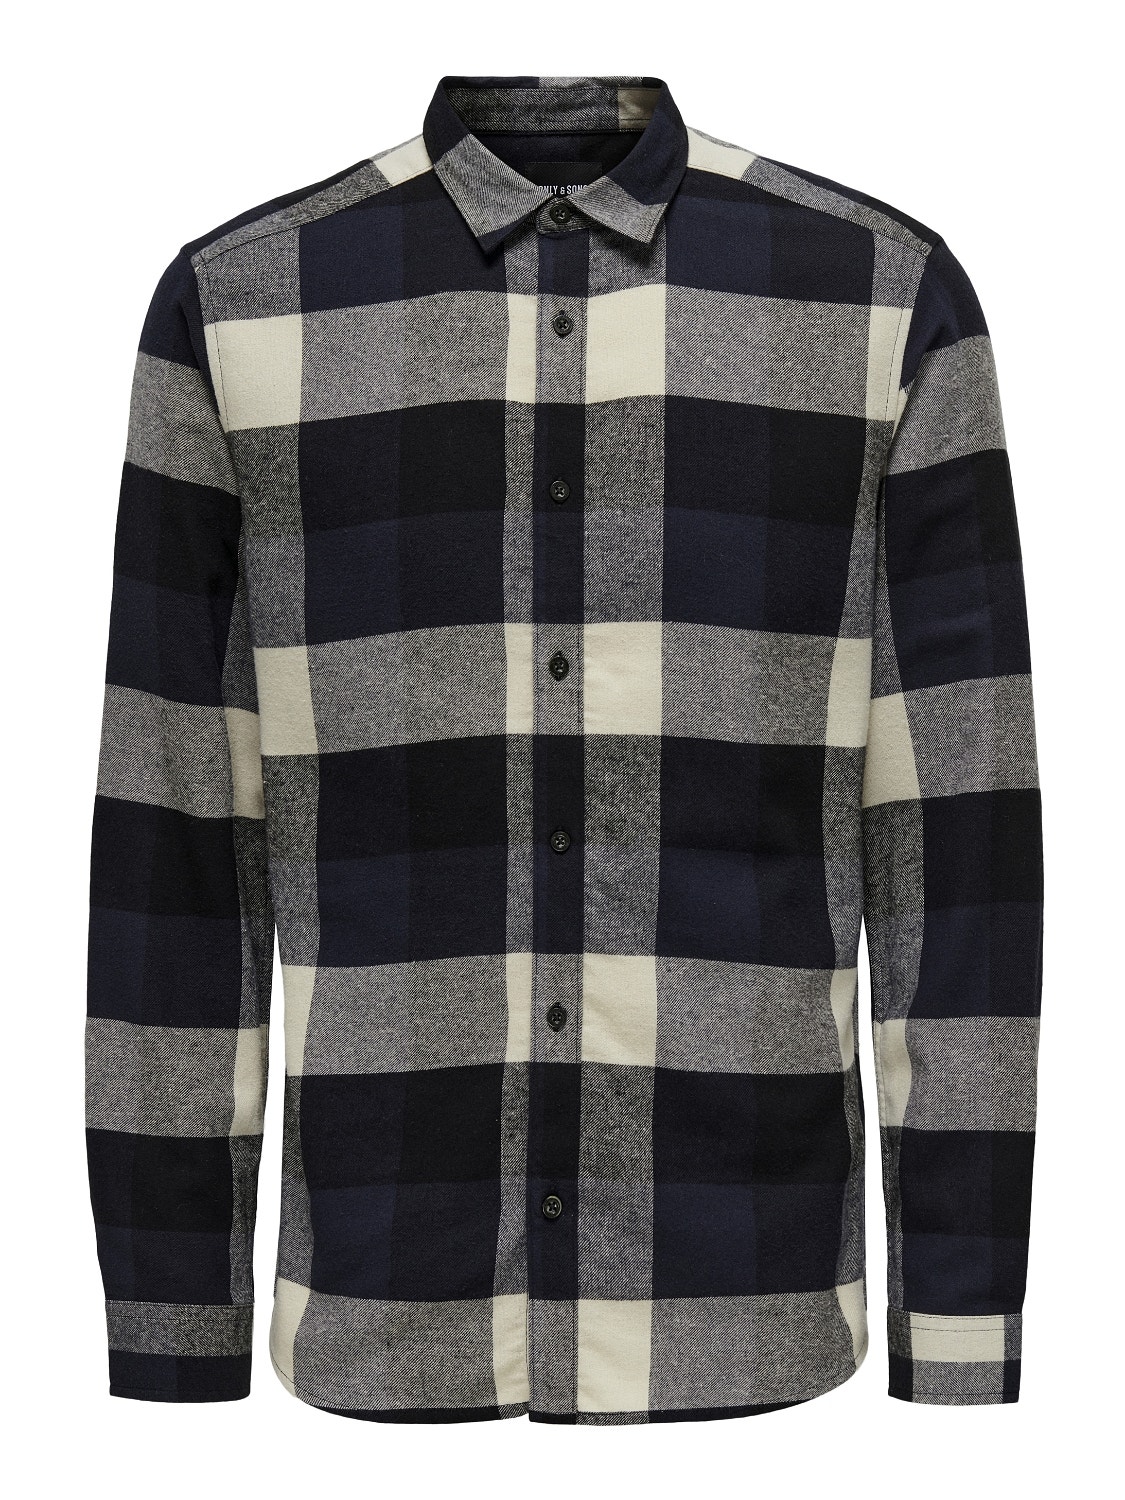 ONLY & SONS Checked shirt -Dark Navy - 22020301